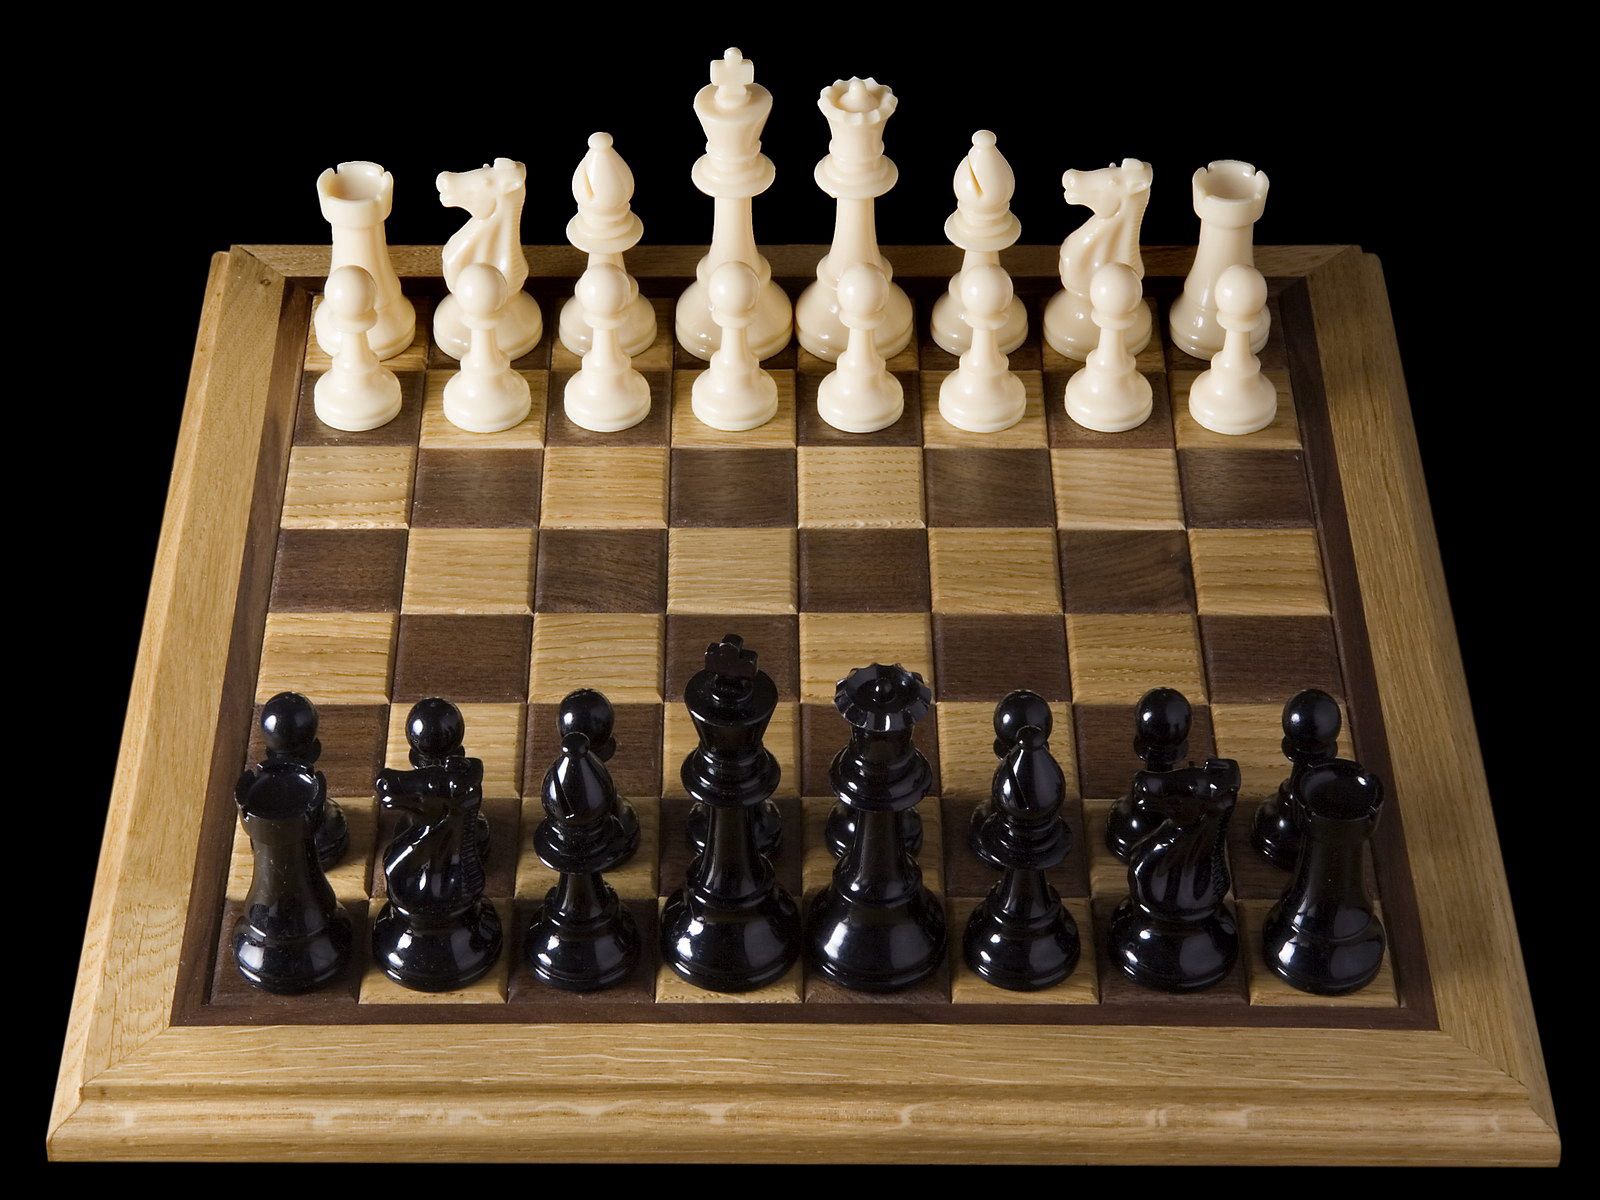 chess, consignment, sports, black, white, shapes, shape, game, board, party 2160p